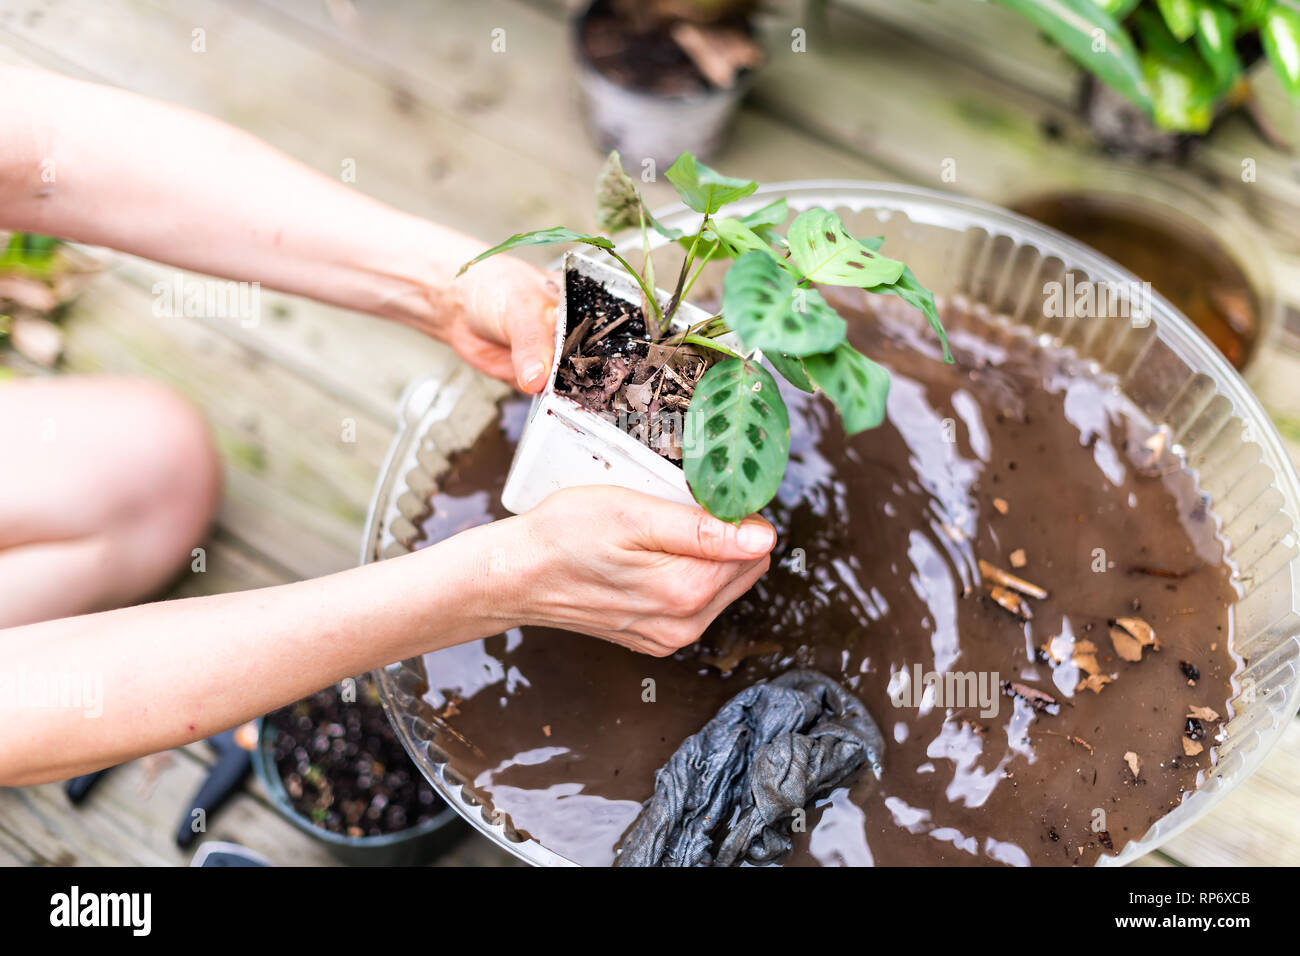 Woman hand holding potted calathea zebra peacock plant with dirt and soil pot flowerpot outside home garden backyard washing with water planting seedl Stock Photo